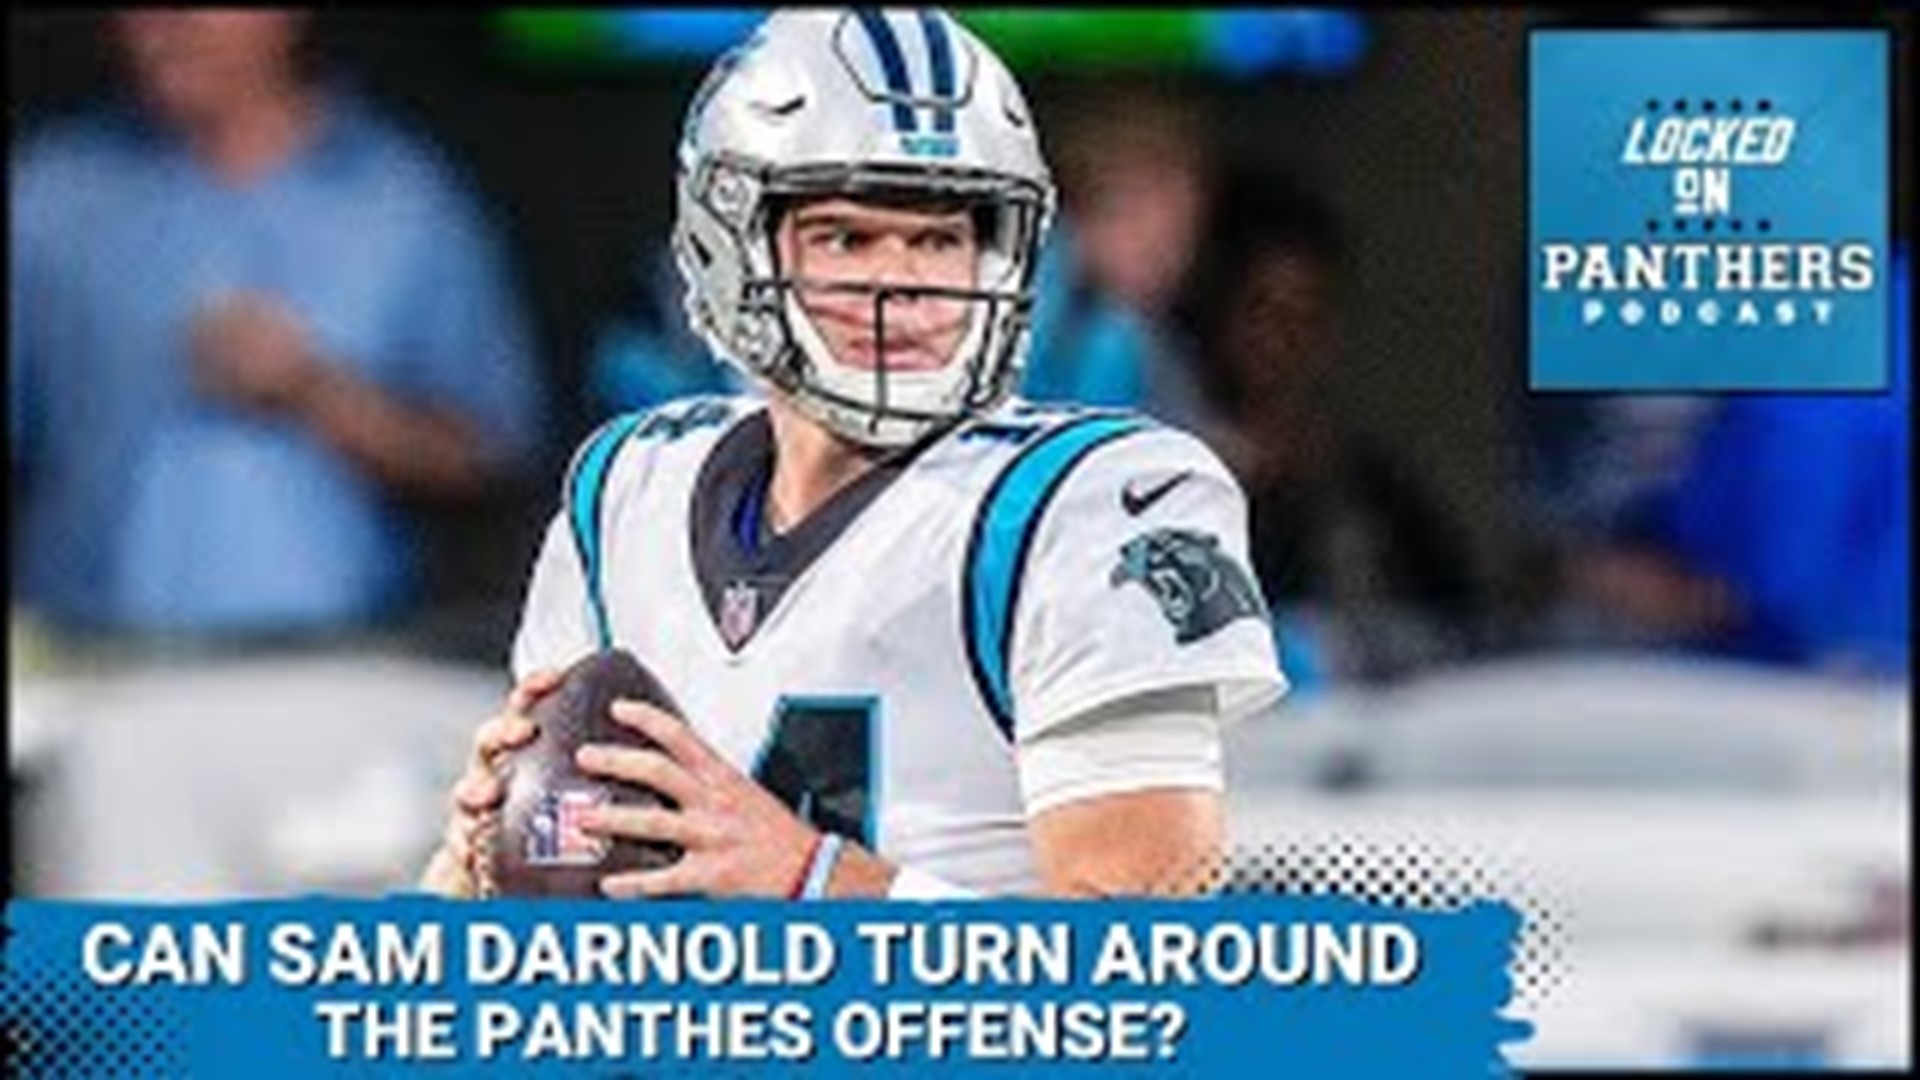 The Panthers announced on Tuesday that Sam Darnold will start at QB on Sunday against the Denver Broncos. Can Darnold fulfill the promise of his draft position?